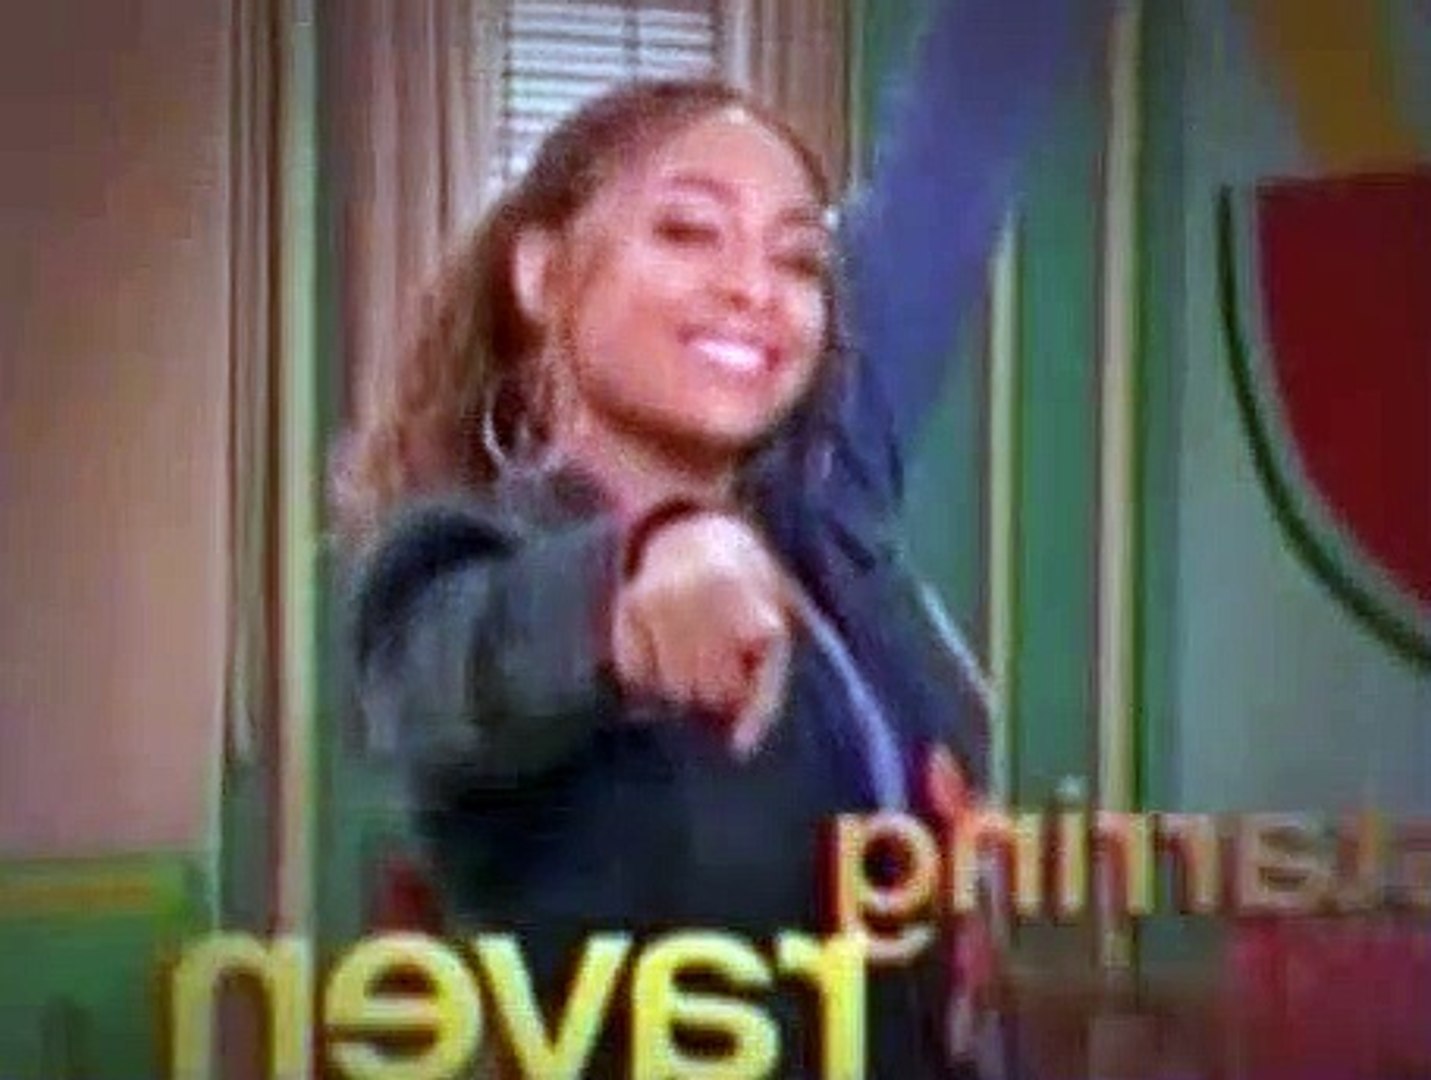 That's So Raven Season 3 Episode 23 - Too Much Pressure - video Dailymotion